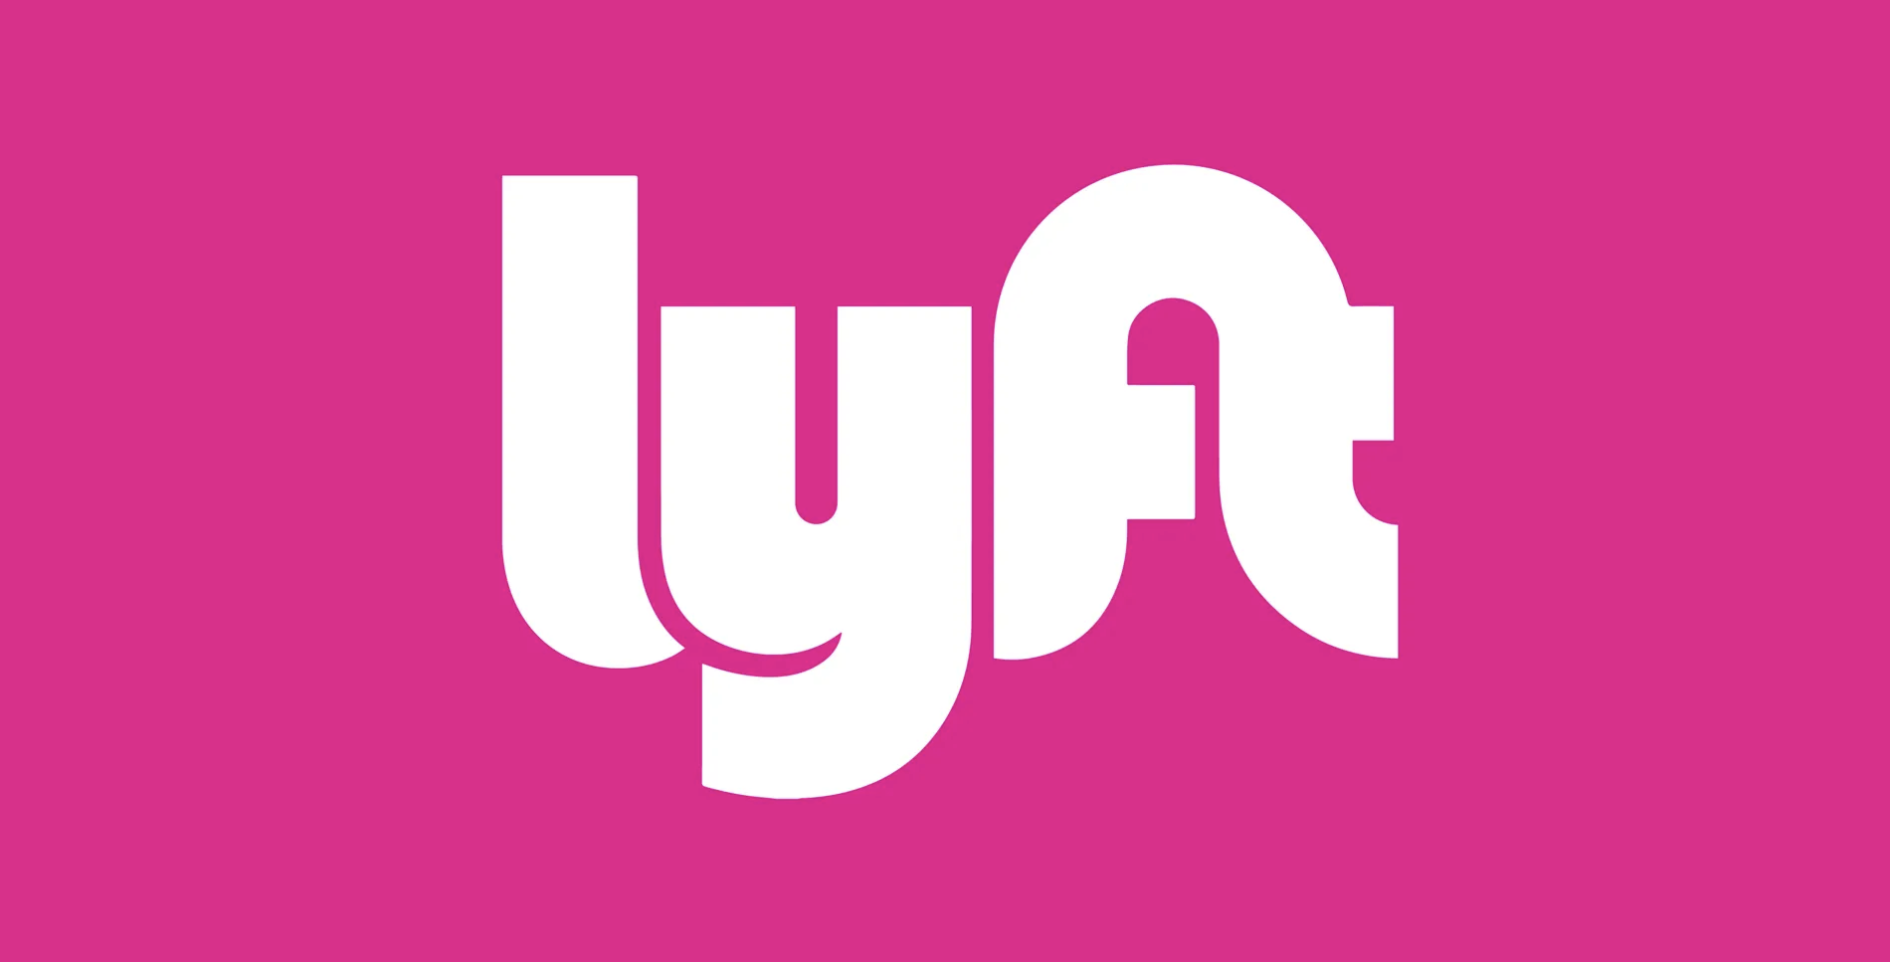 Lyft logo in white on a pink background.